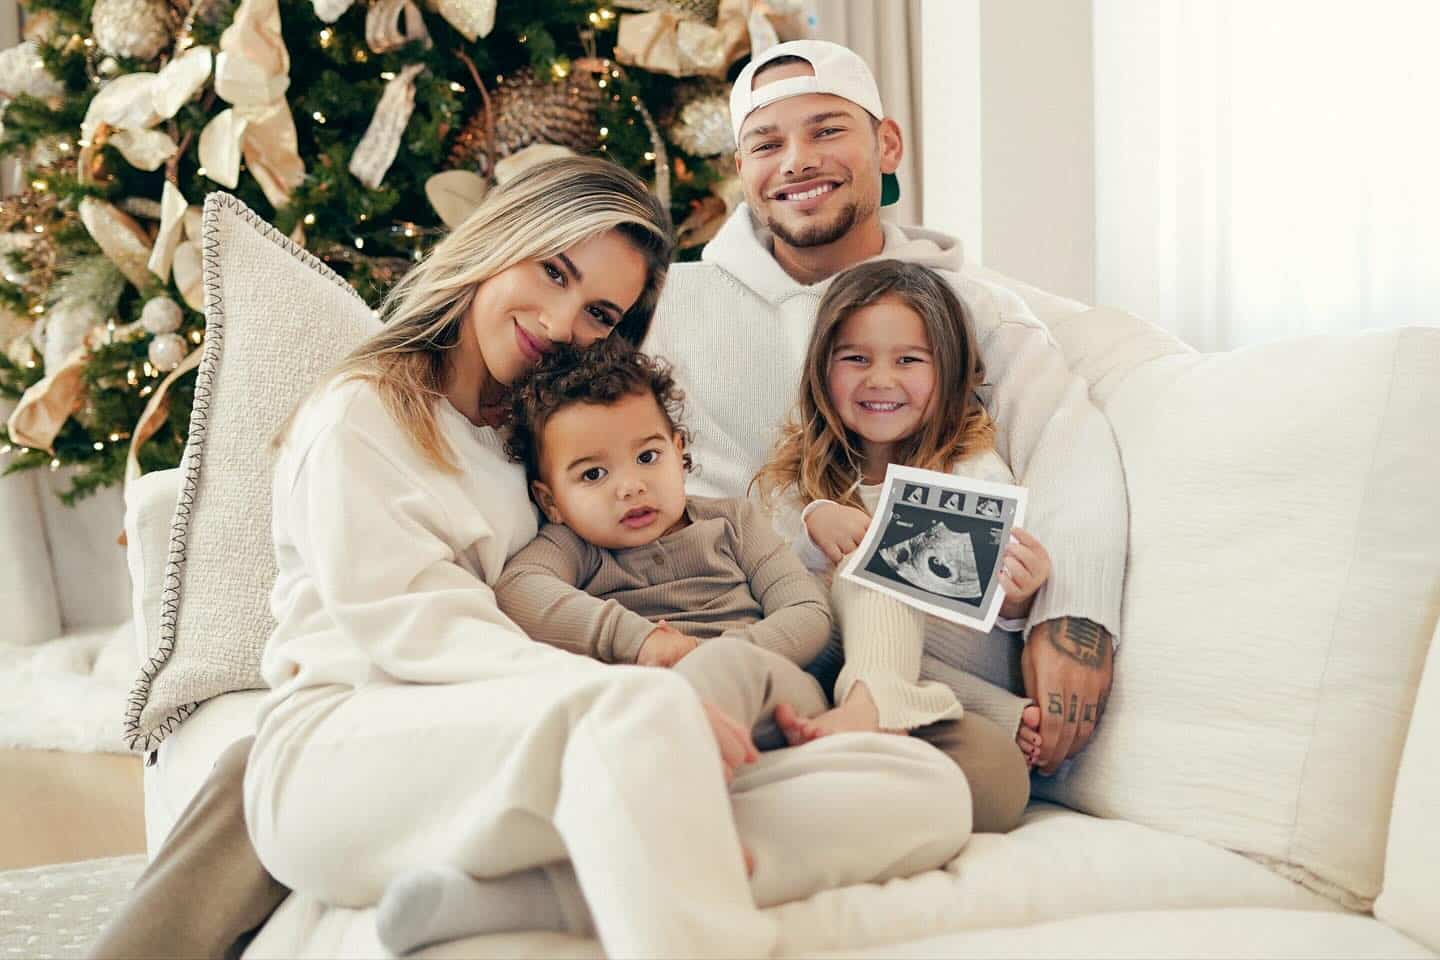 Carly Pearce stepped up to sing "Thank God" with Kane Brown because Katelyn is getting further along in her pregnancy. She and Kane shared their baby news on Christmas Day.